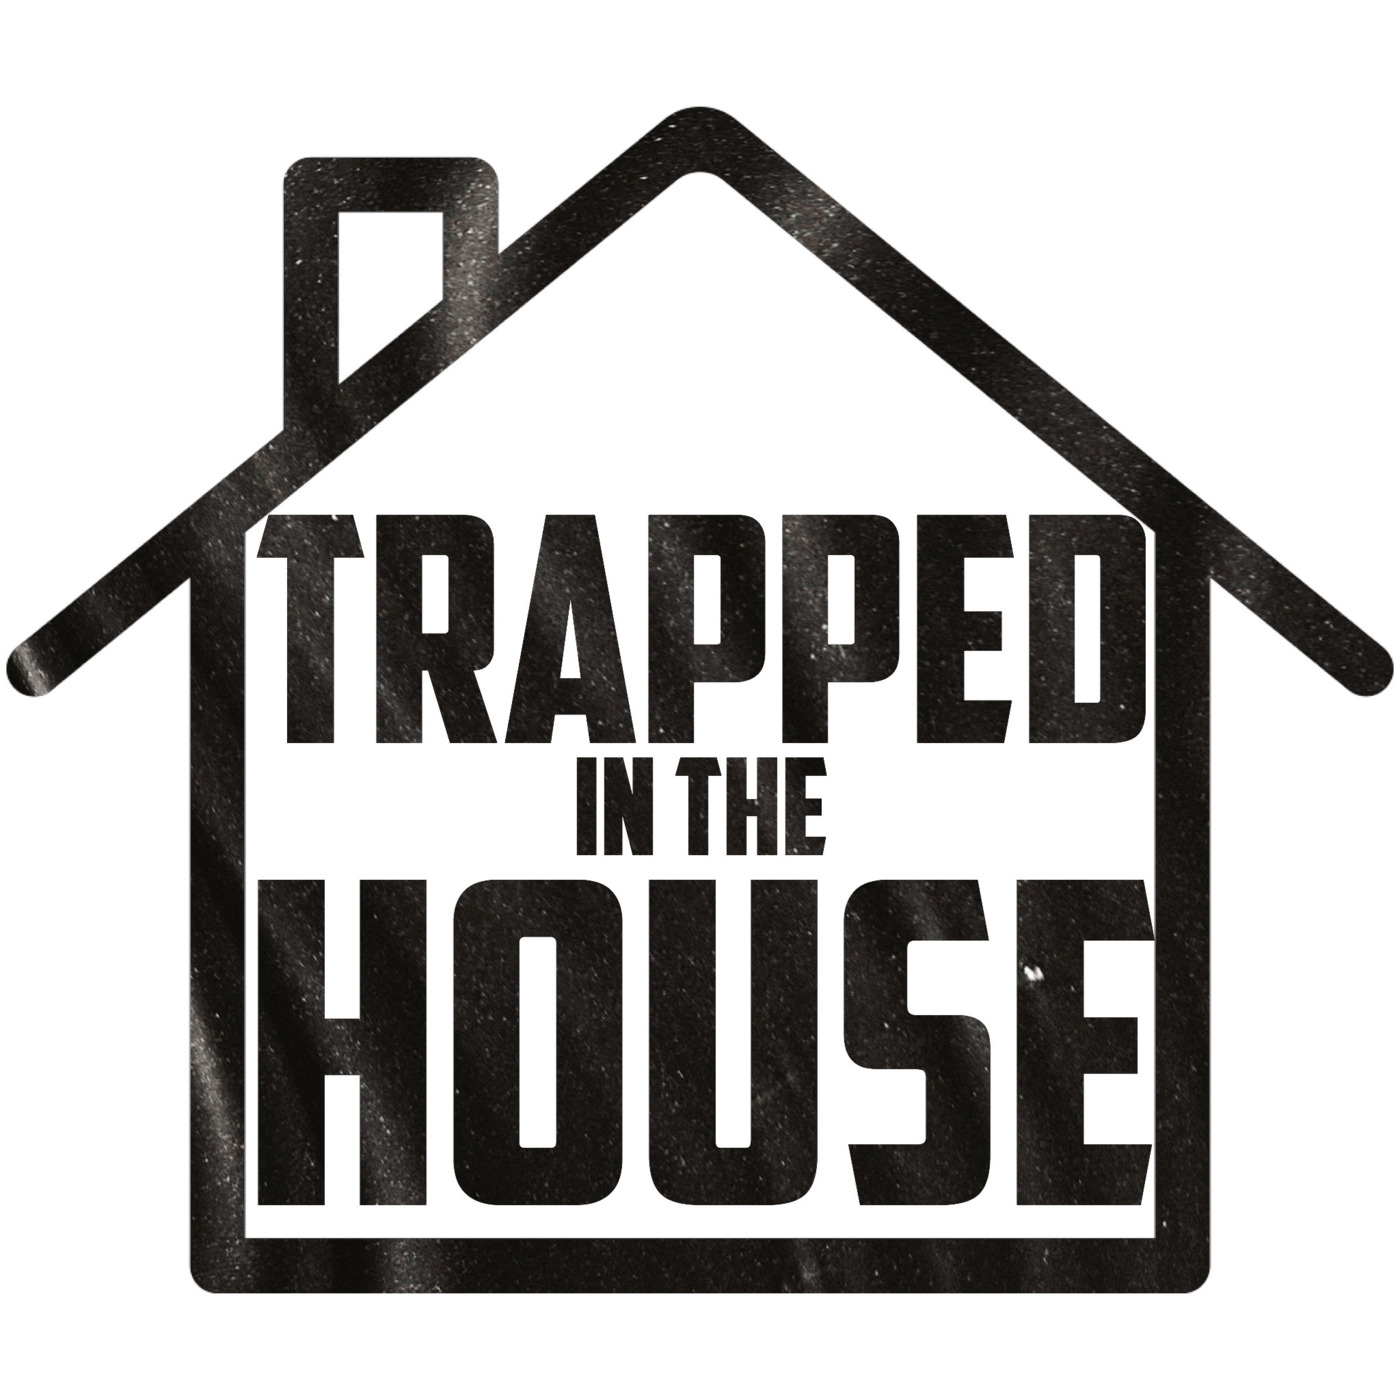 Episode 85: MIKEY GALLAGHER TRAPPED IN THE HOUSE 22-08